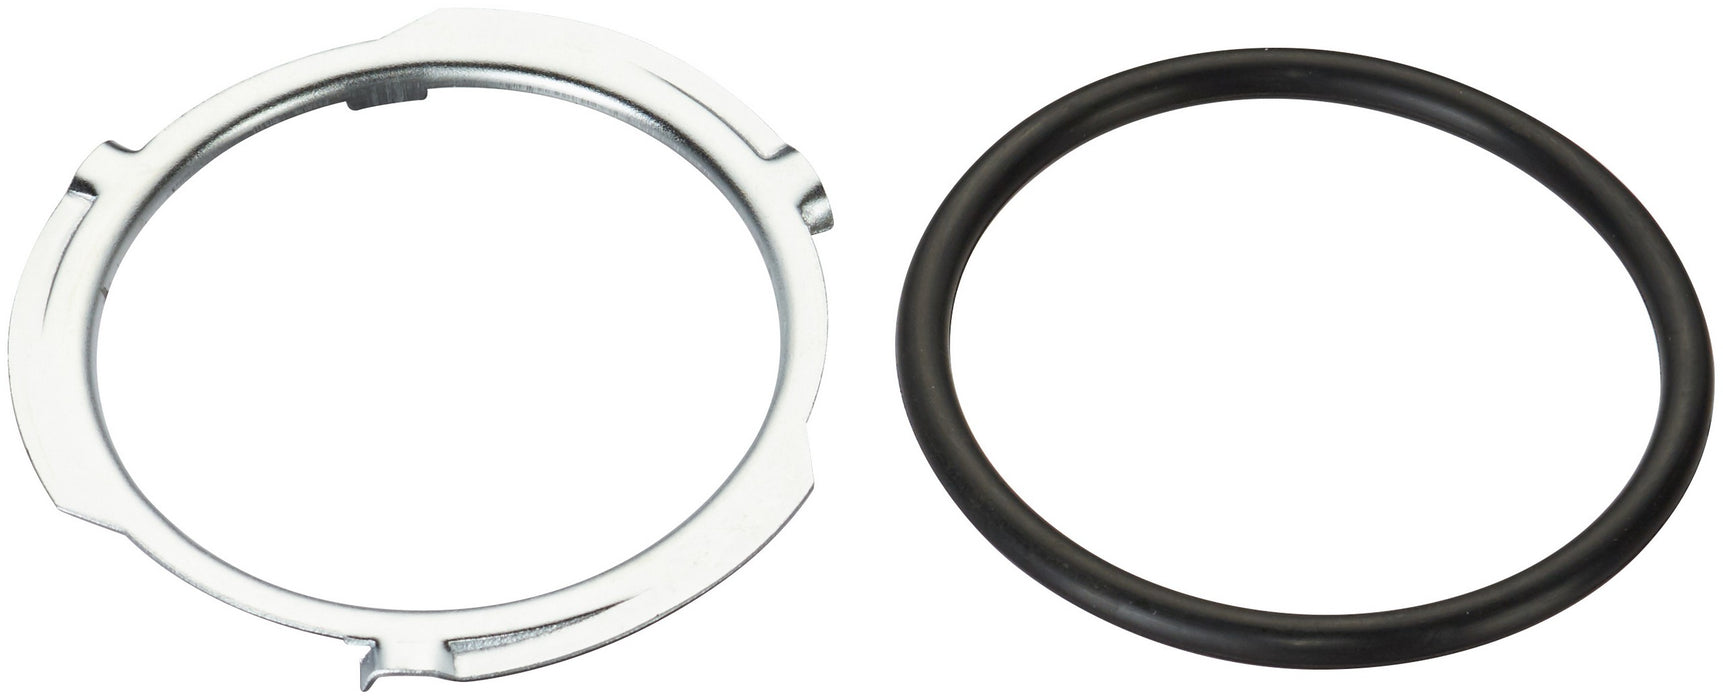 Fuel Tank Lock Ring for Chevrolet P20 1989 1988 1987 1986 1985 1984 1983 1982 1981 1980 1979 1978 1977 1976 1975 - Spectra LO01